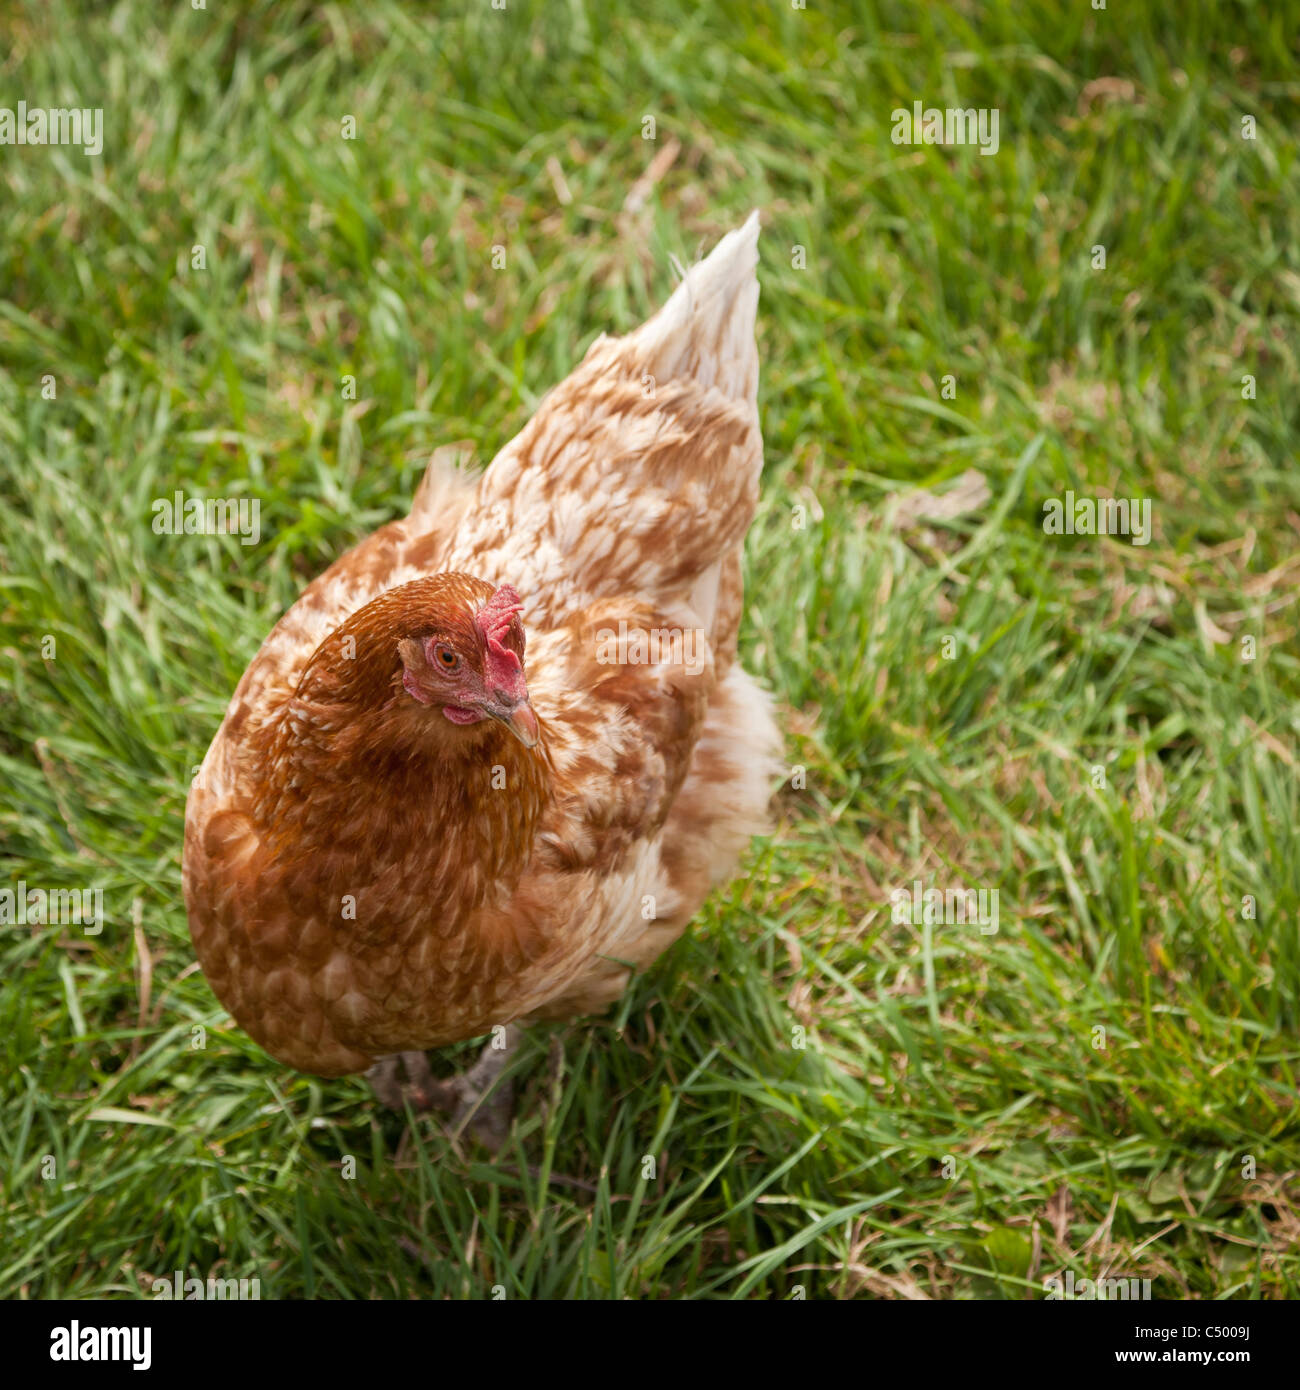 Chicken outside close up Stock Photo